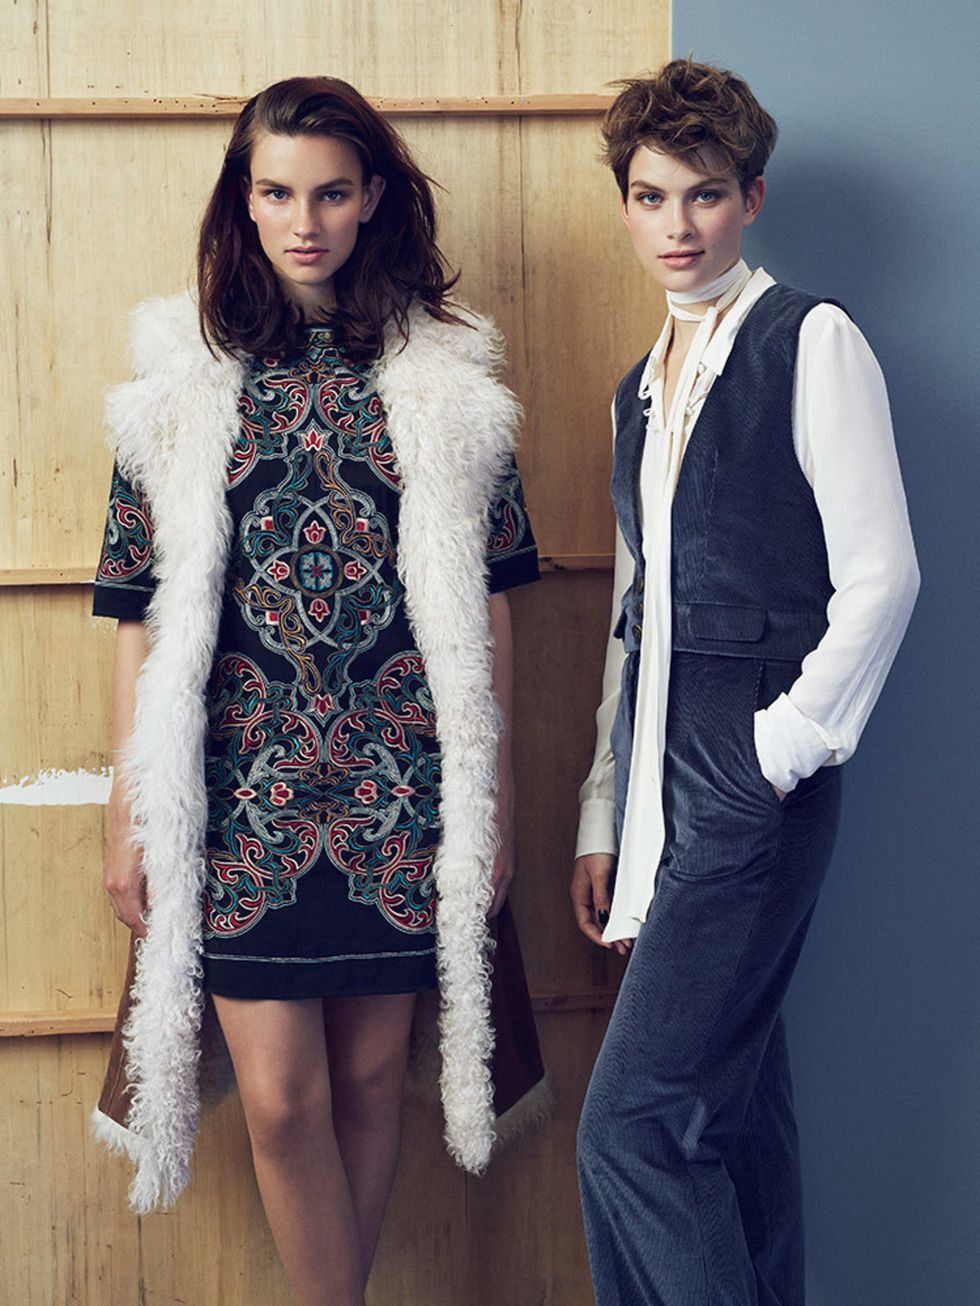 <p>ELLE UK September Issue &#39;Style for Less&#39;</p>

<p>Left: Warehouse</p>

<p>Right: Marks and Spencer</p>

<p><span style="line-height:1.6">Photographer: Hodur Ingason</span></p>